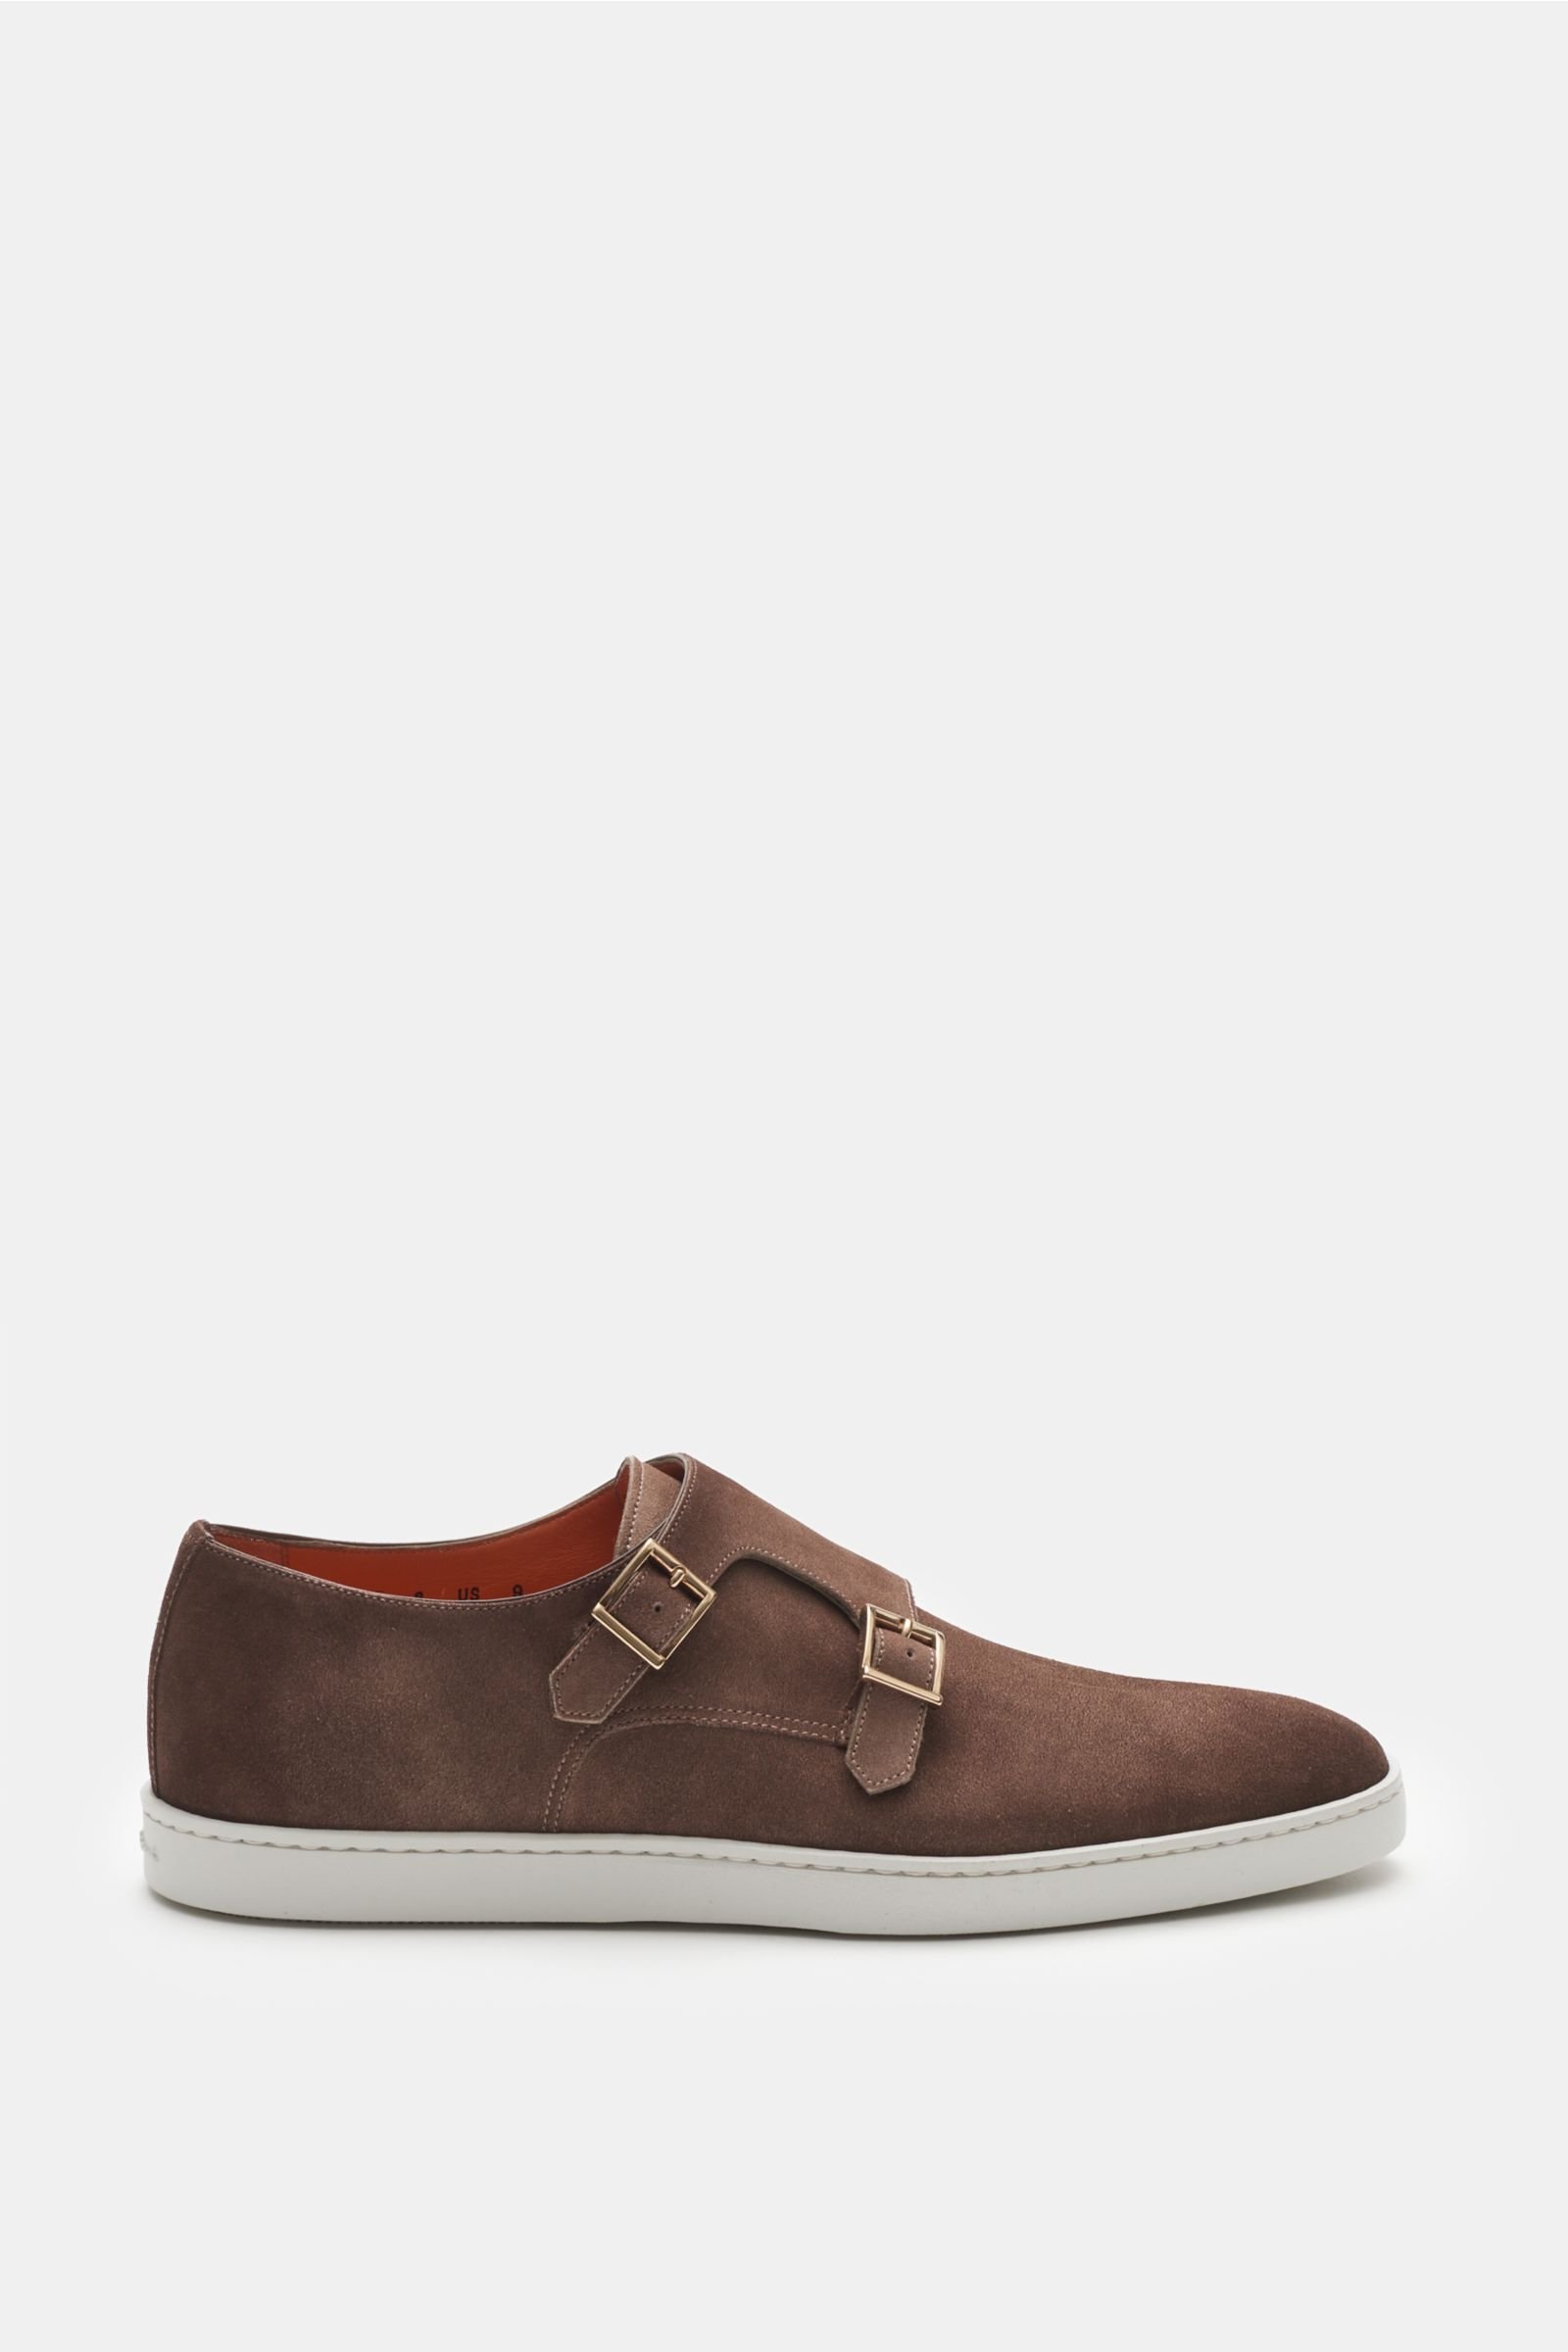 Double monk shoes grey-brown